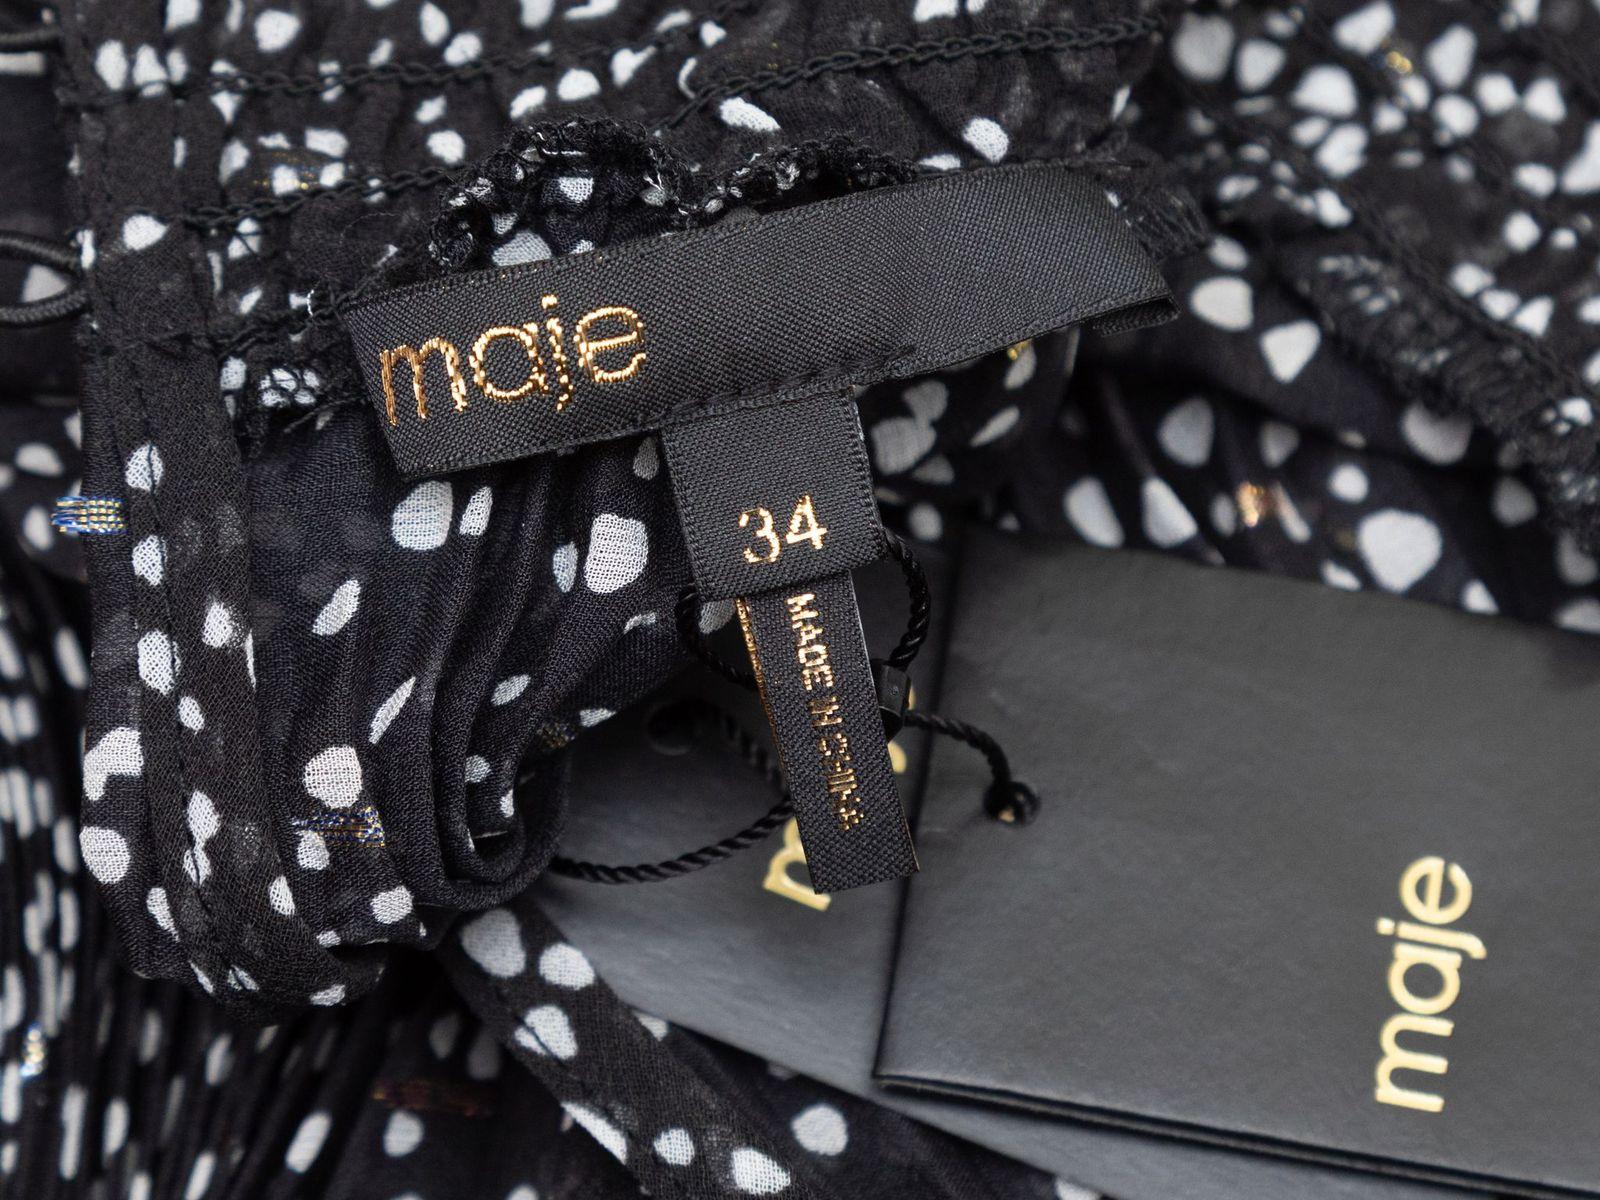 Product Details: Black and white silk polka dot print mini dress by Maje. Crew neck. Long sleeves. 50